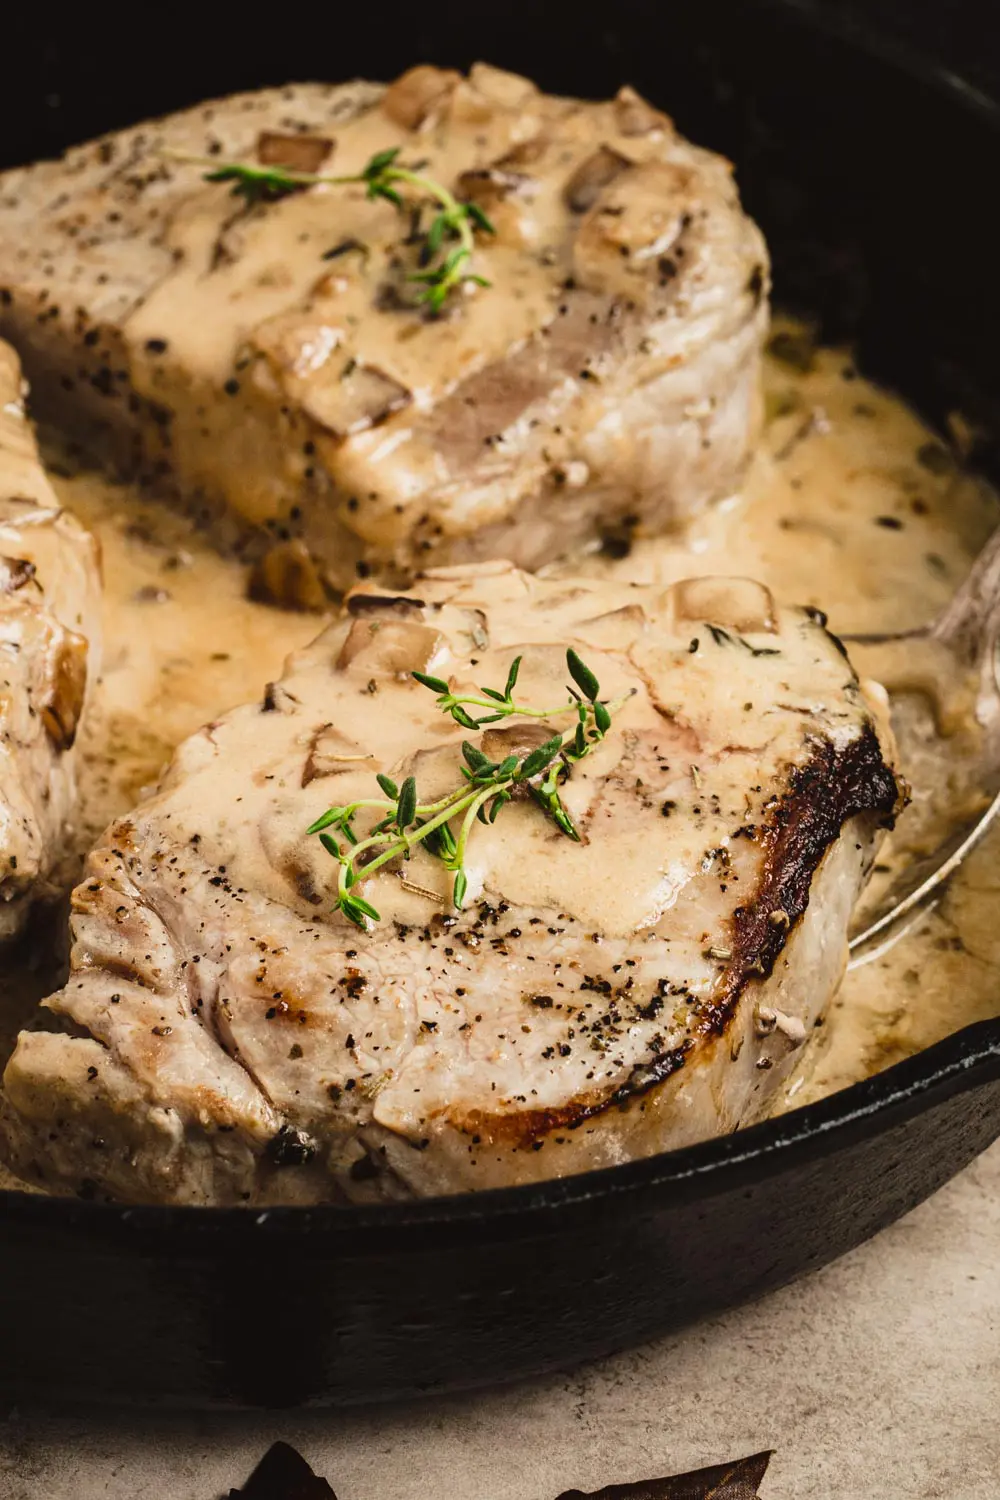 Apple cider brined pork chops in an apple cider cream sauce topped with fresh thyme in an iron skillet.